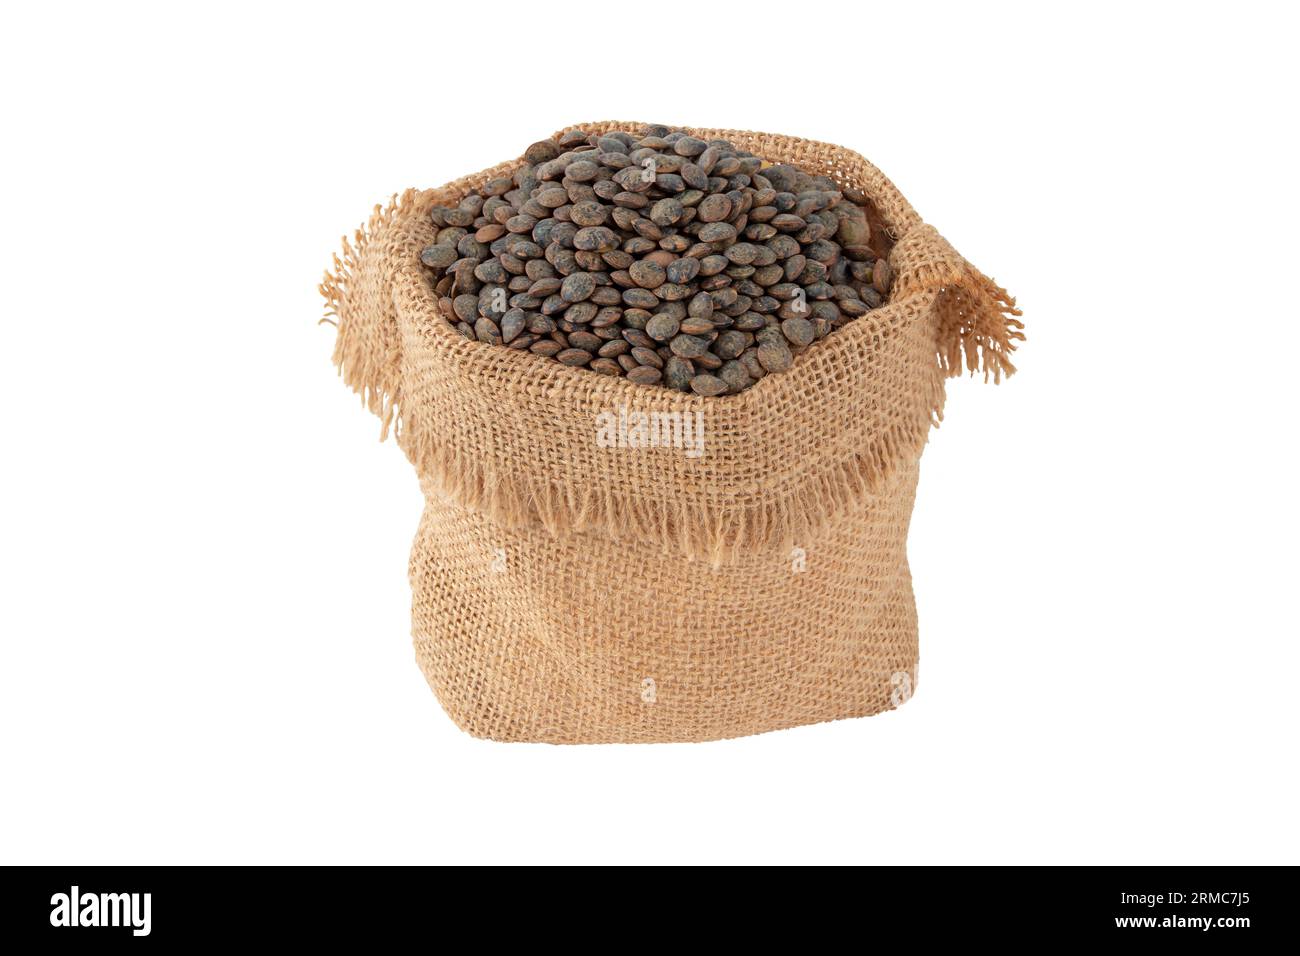 Dark lentils in the jute canvas sack isolated on white. Uncooked,raw legume. Stock Photo